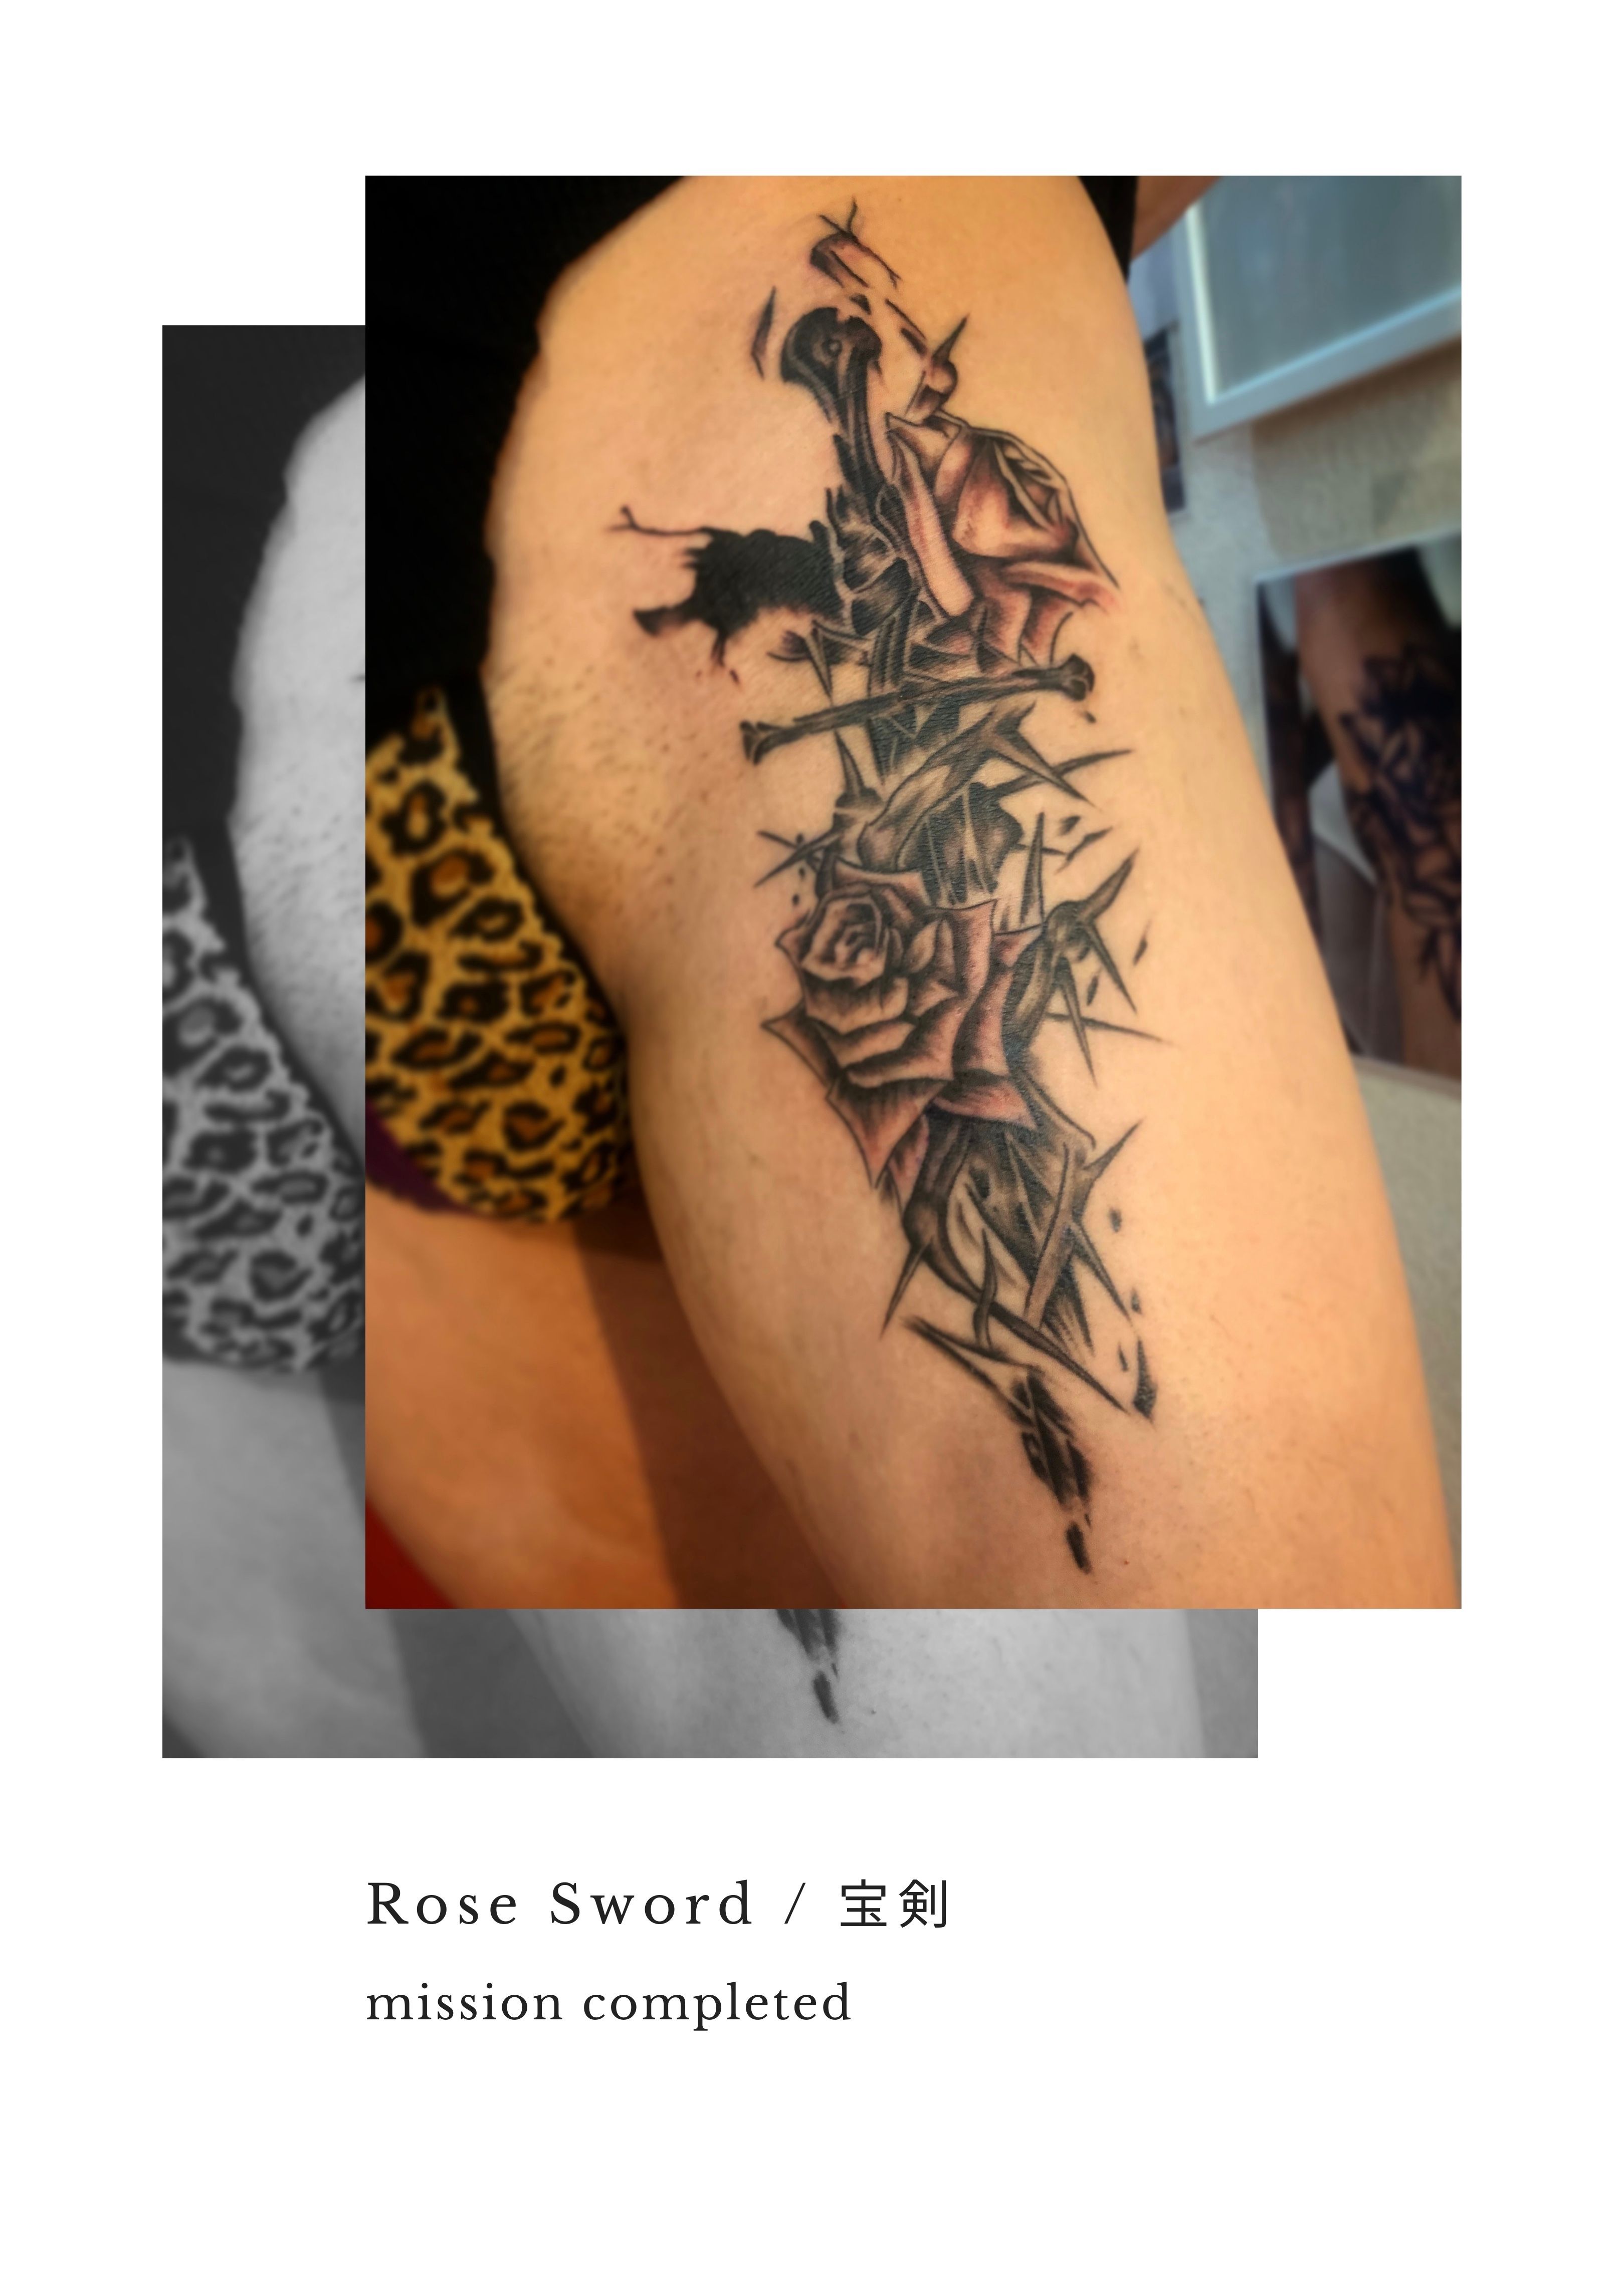 Tattoo Uploaded By Ken Ipo Riku Loyal Tattoo Tokyo Japanese And Asian Tribal Style Tattoo Ipo Tattoo Loyal Tokyo 東京 渋谷 刺青 タトゥースタジオ The Banana In The Refrigerator Has An Expiration Date